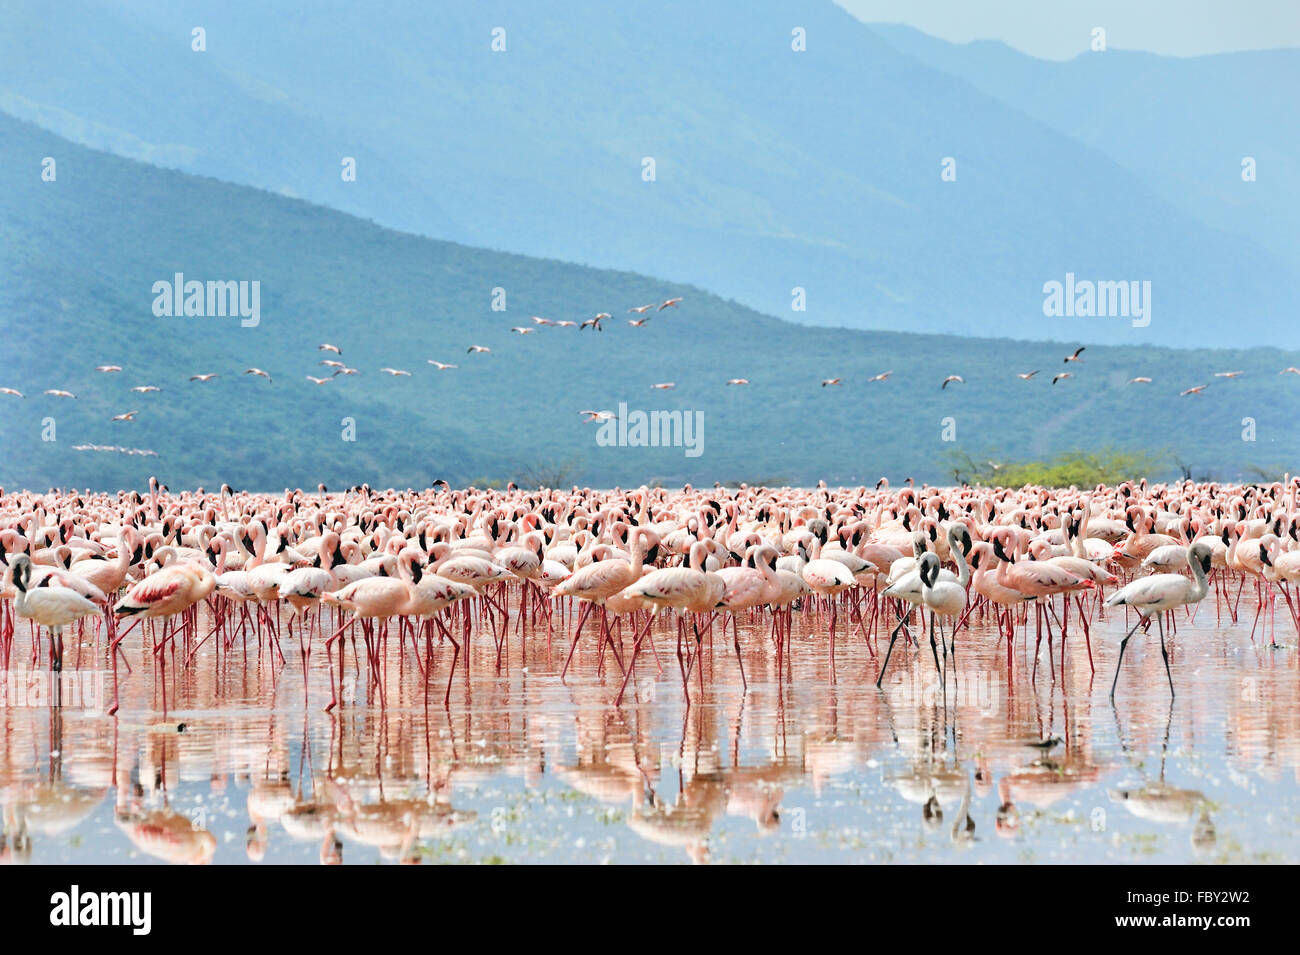 Flamingos in Great Rift Valley Stock Photo